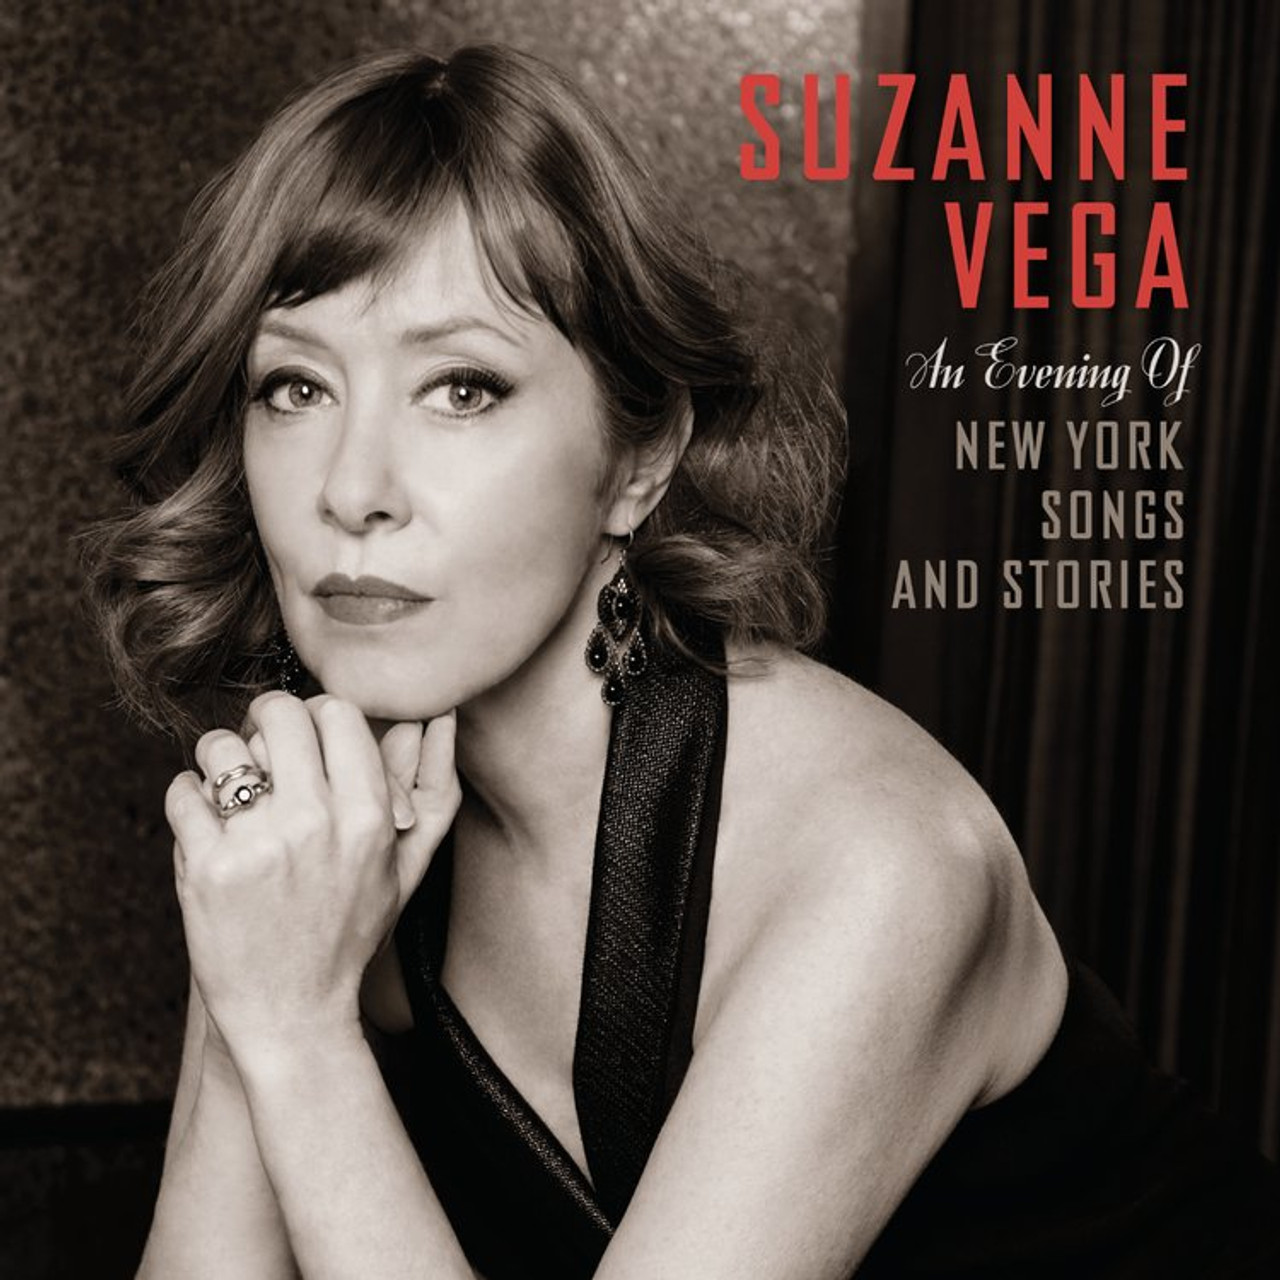 https://cdn11.bigcommerce.com/s-ope853byfp/images/stencil/1280x1280/products/5730/56561/Suzanne_Vega_An_Evening_Of_New_York_Songs_And_Stories__2x_Plastic_Reel_quarter_inch_19cm_s_75ips_Tape_LPR90-Horch_House-HH0400228-front-cover__77632.1711372723.jpg?c=2